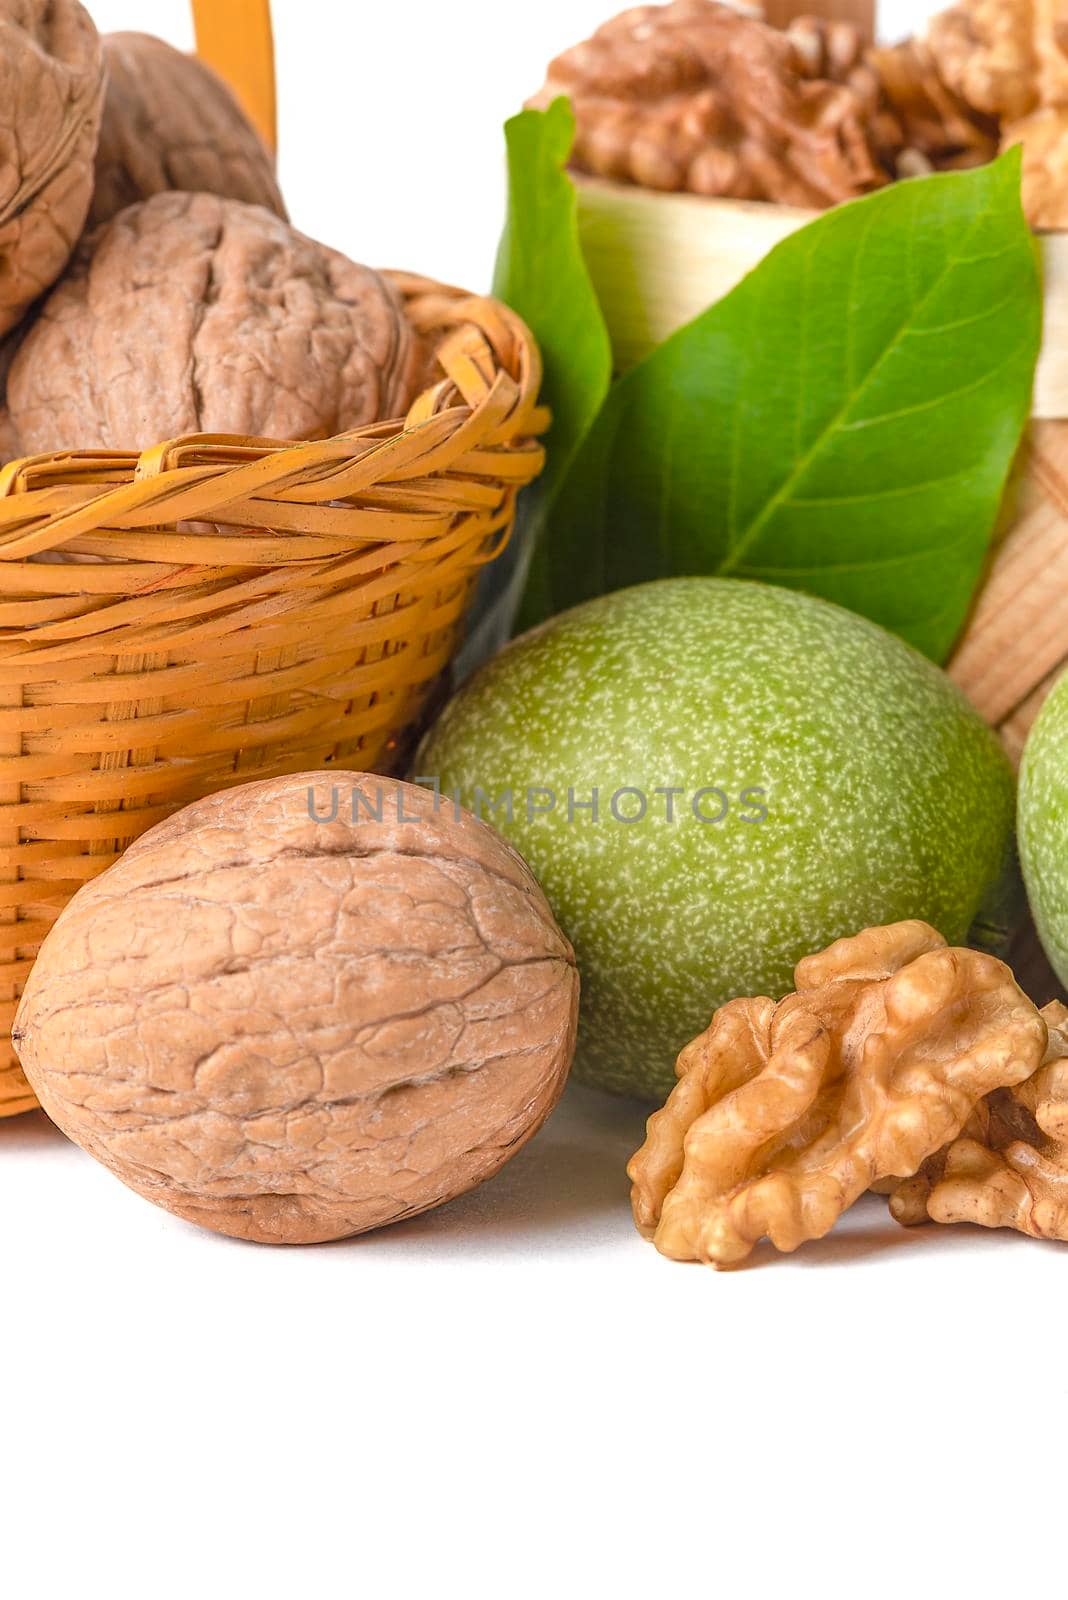 Walnut. Walnut fruits of different varieties lie in wooden saucers and baskets on a white isolated background. Nearby are green leaves and unripe walnut fruits